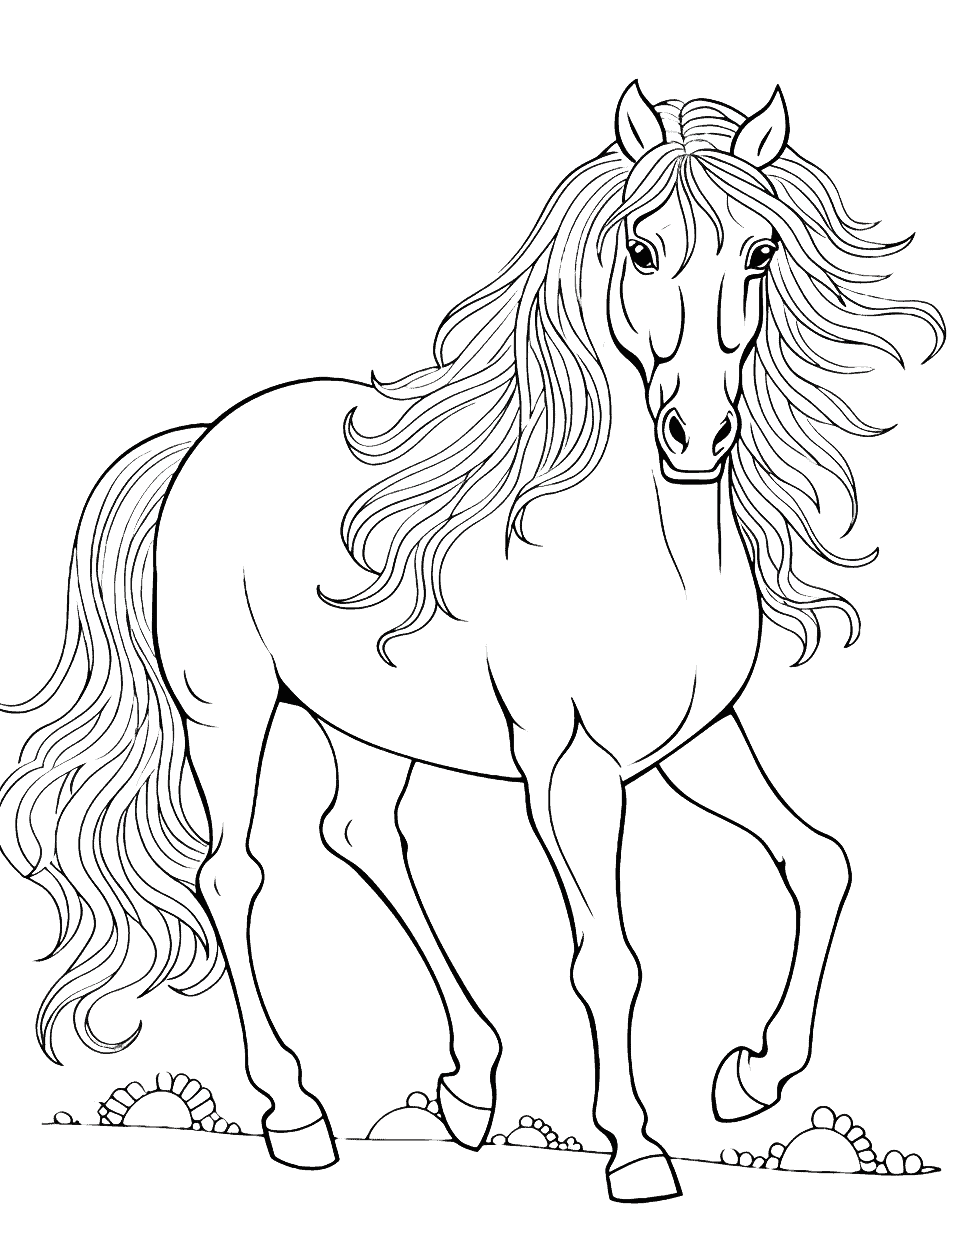 Majestic Friesian Horse Coloring Page - A Friesian horse with impressive size and long, flowing mane and tail.